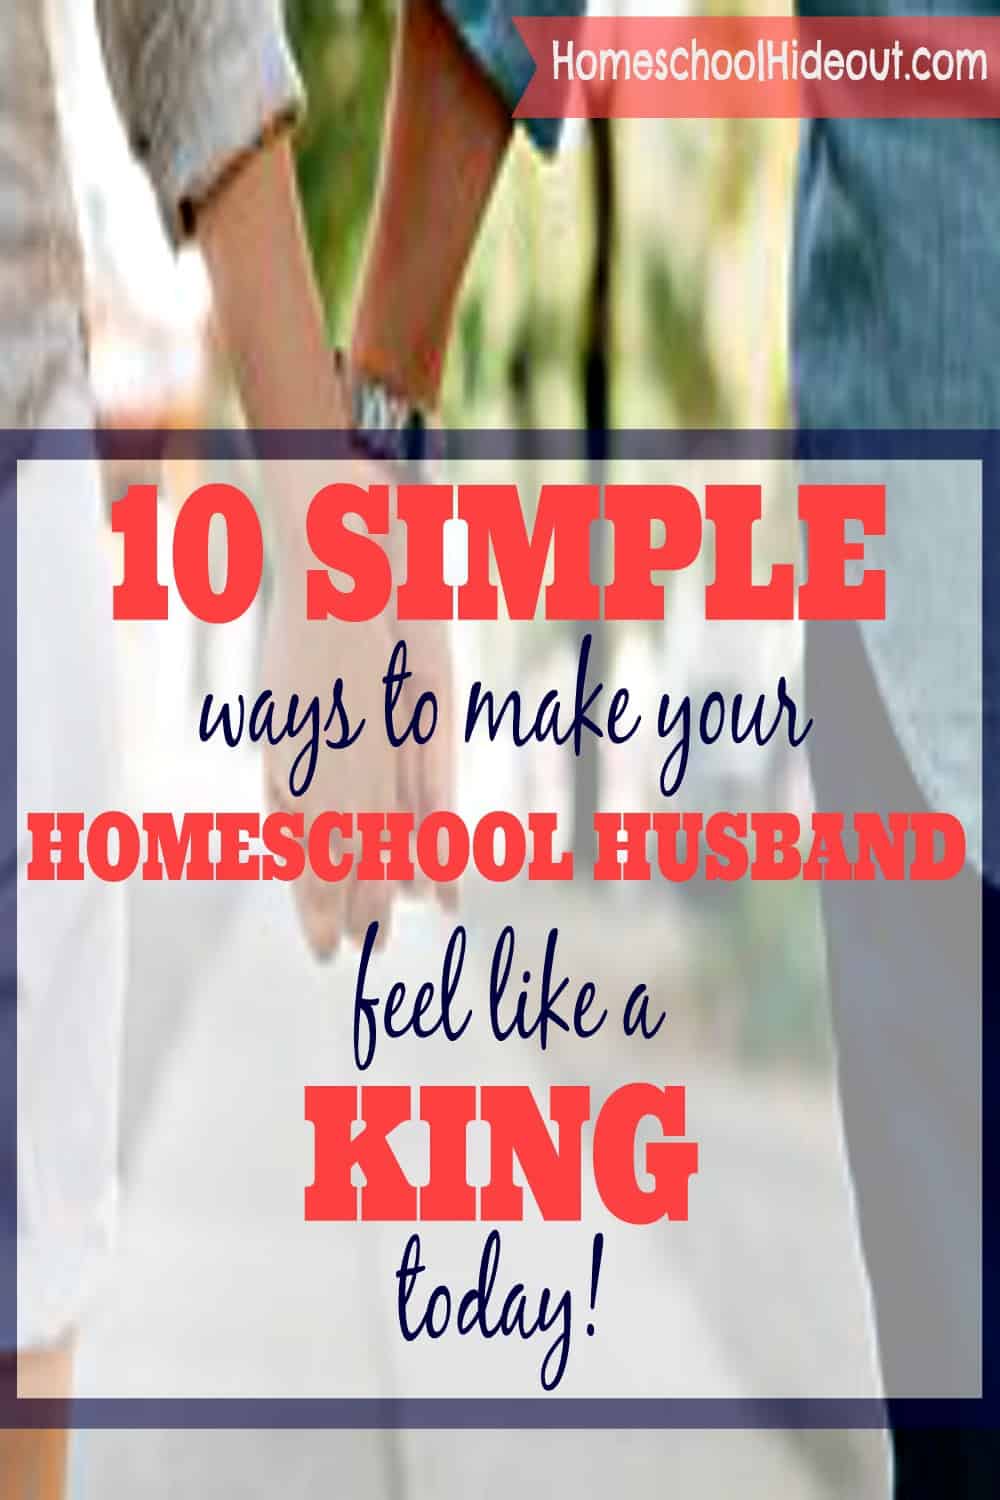 Simple tips to make your husband feel appreciated. Great ideas for homeschooling famliies, who tend to forget to include Dad in their day-to-day activities.